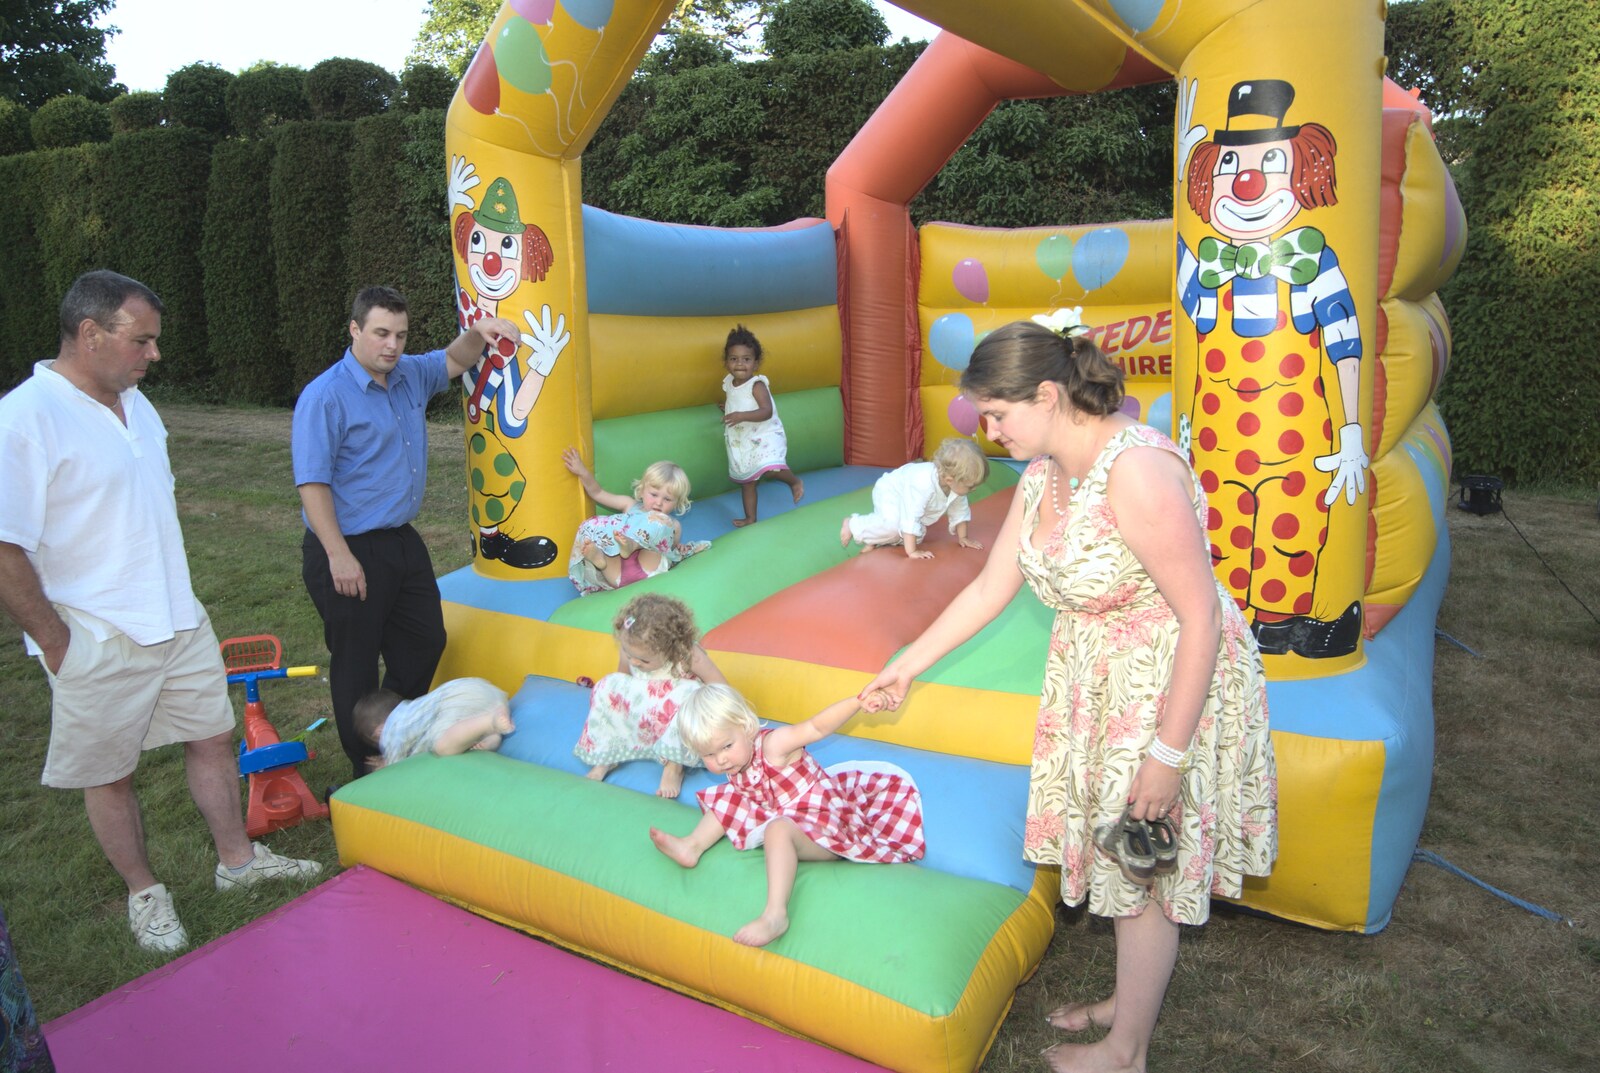 Isobel scoops a child off the inflatable from Clive and Suzanne's Wedding, Oakley and Brome, Suffolk - 10th July 2010